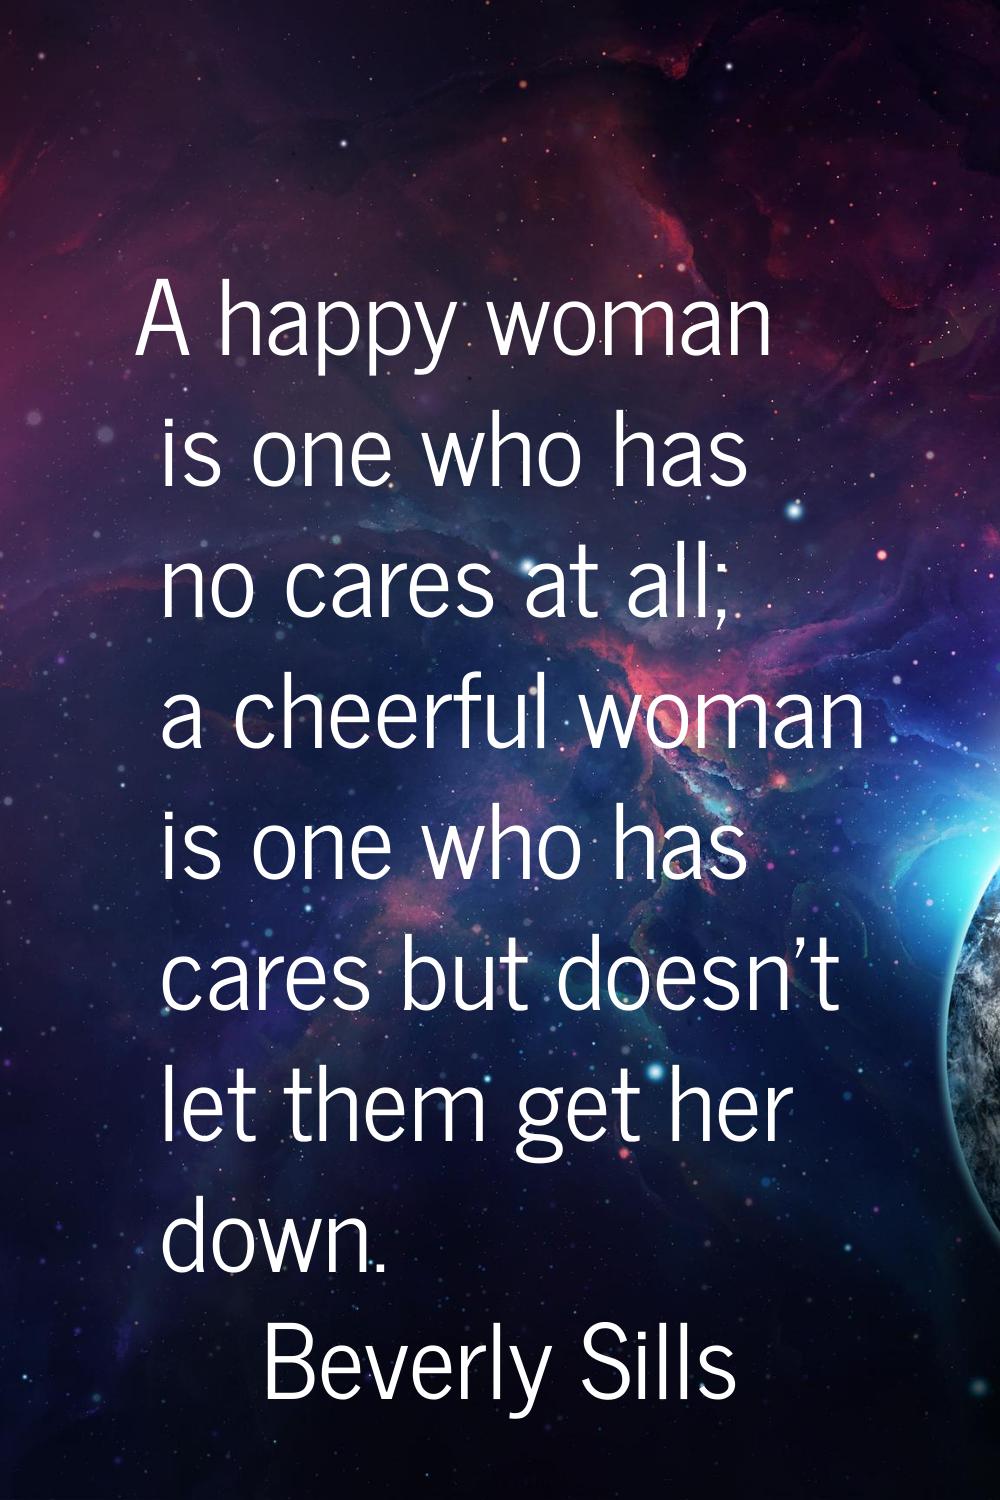 A happy woman is one who has no cares at all; a cheerful woman is one who has cares but doesn't let